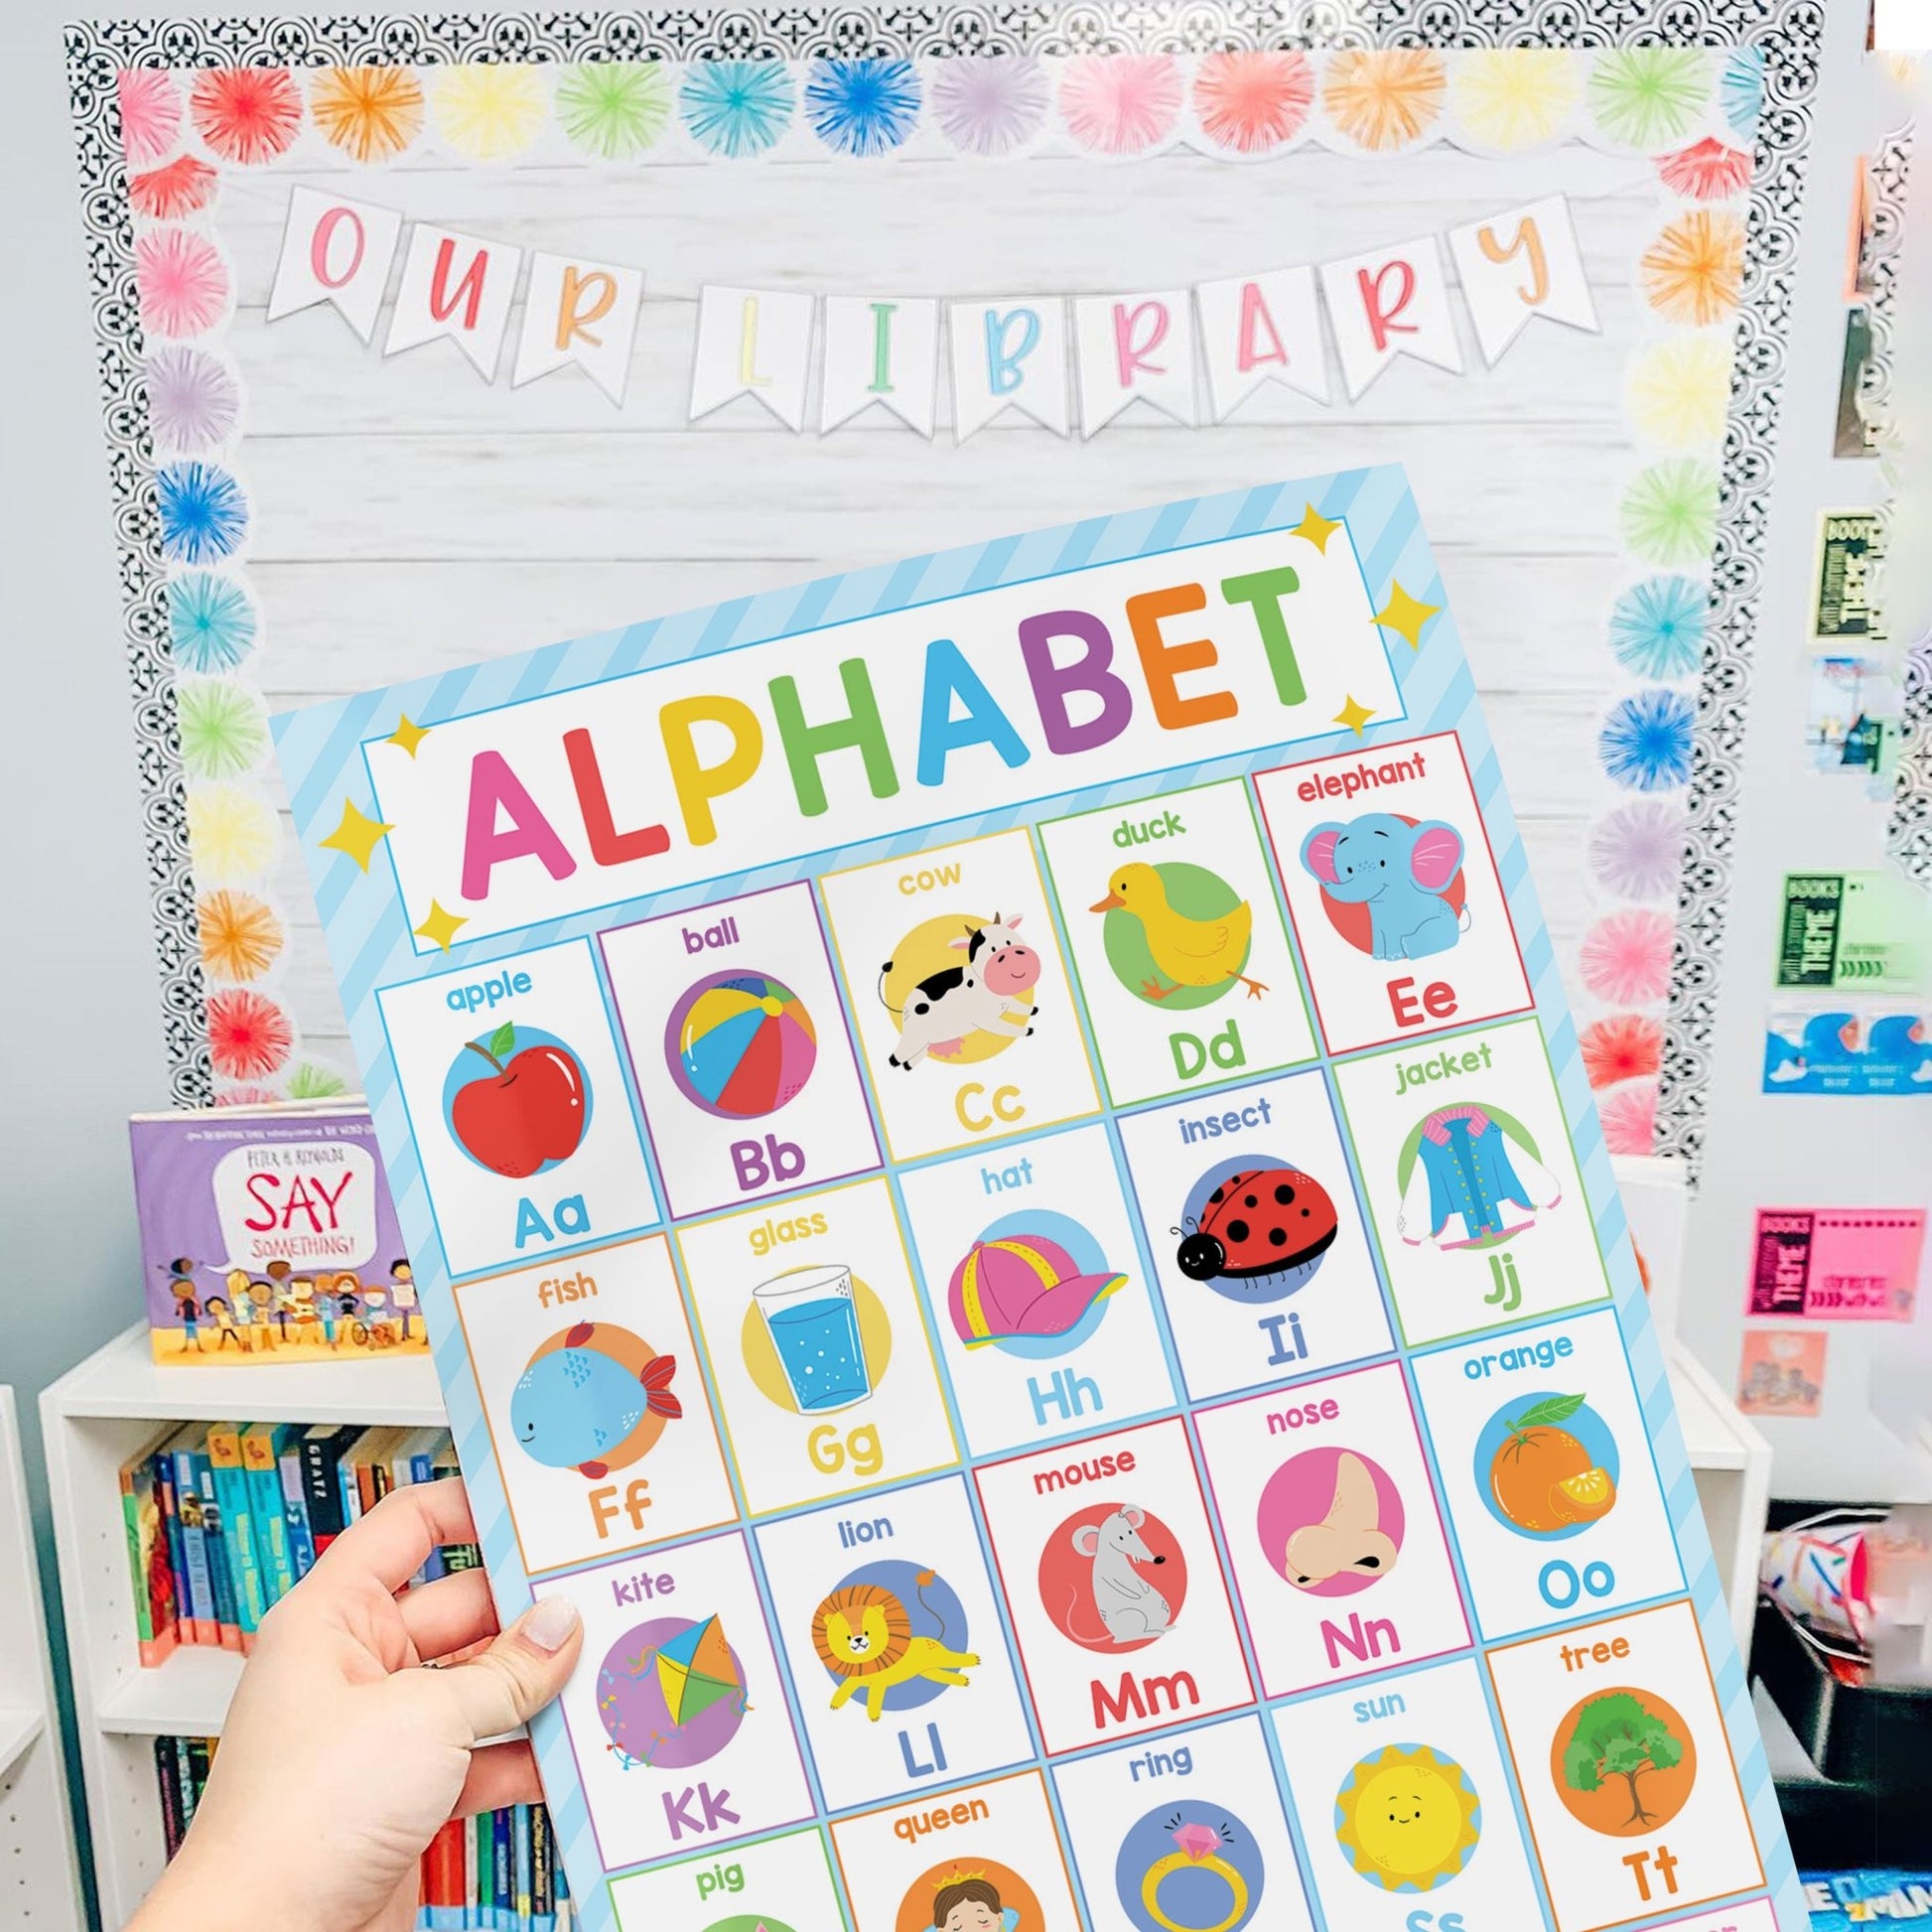 Vibrant Alphabet Chart Poster Laminated For Preschoolers/Kids, Educational Posters For Toddlers, Learning Posters For Toddlers 1-3, Preschool Homeschool Posters For Kindergarten Classroom Wall Decor - BEAWART